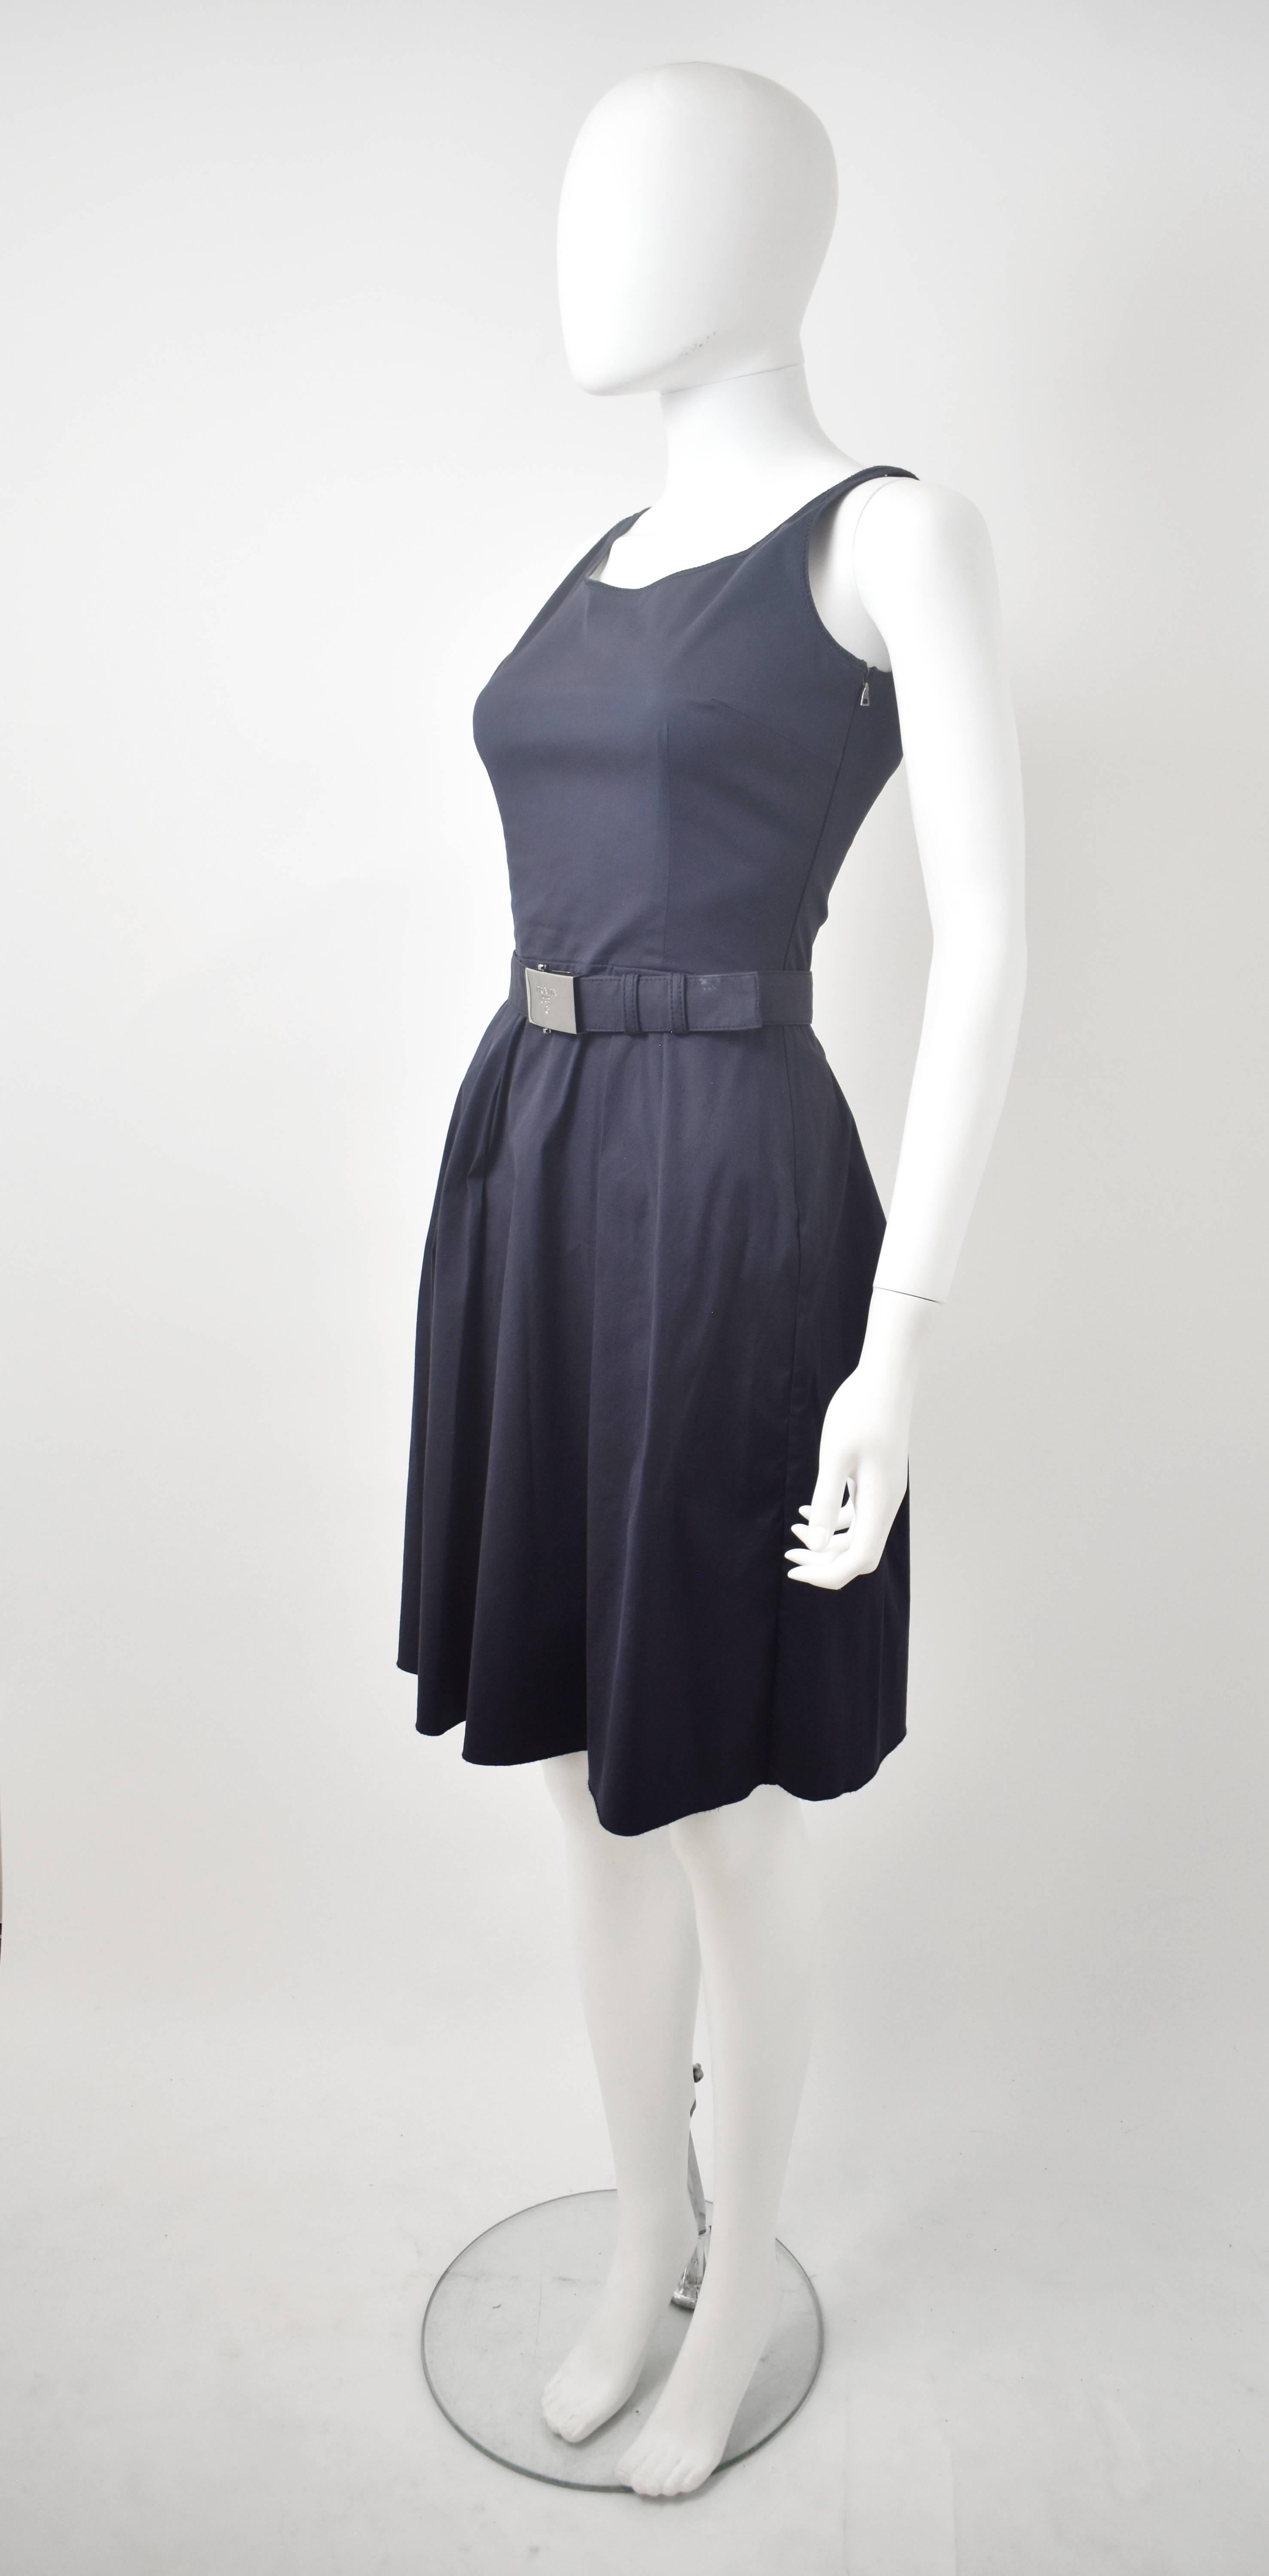 This Prada navy blue dress has a simple, sleeveless design with a fitted bodice and waist and a pleated skirt. The dress is made from a cotton and polyester blend that creates a simultaneously elegant and sportswear-inspired aesthetic synonymous